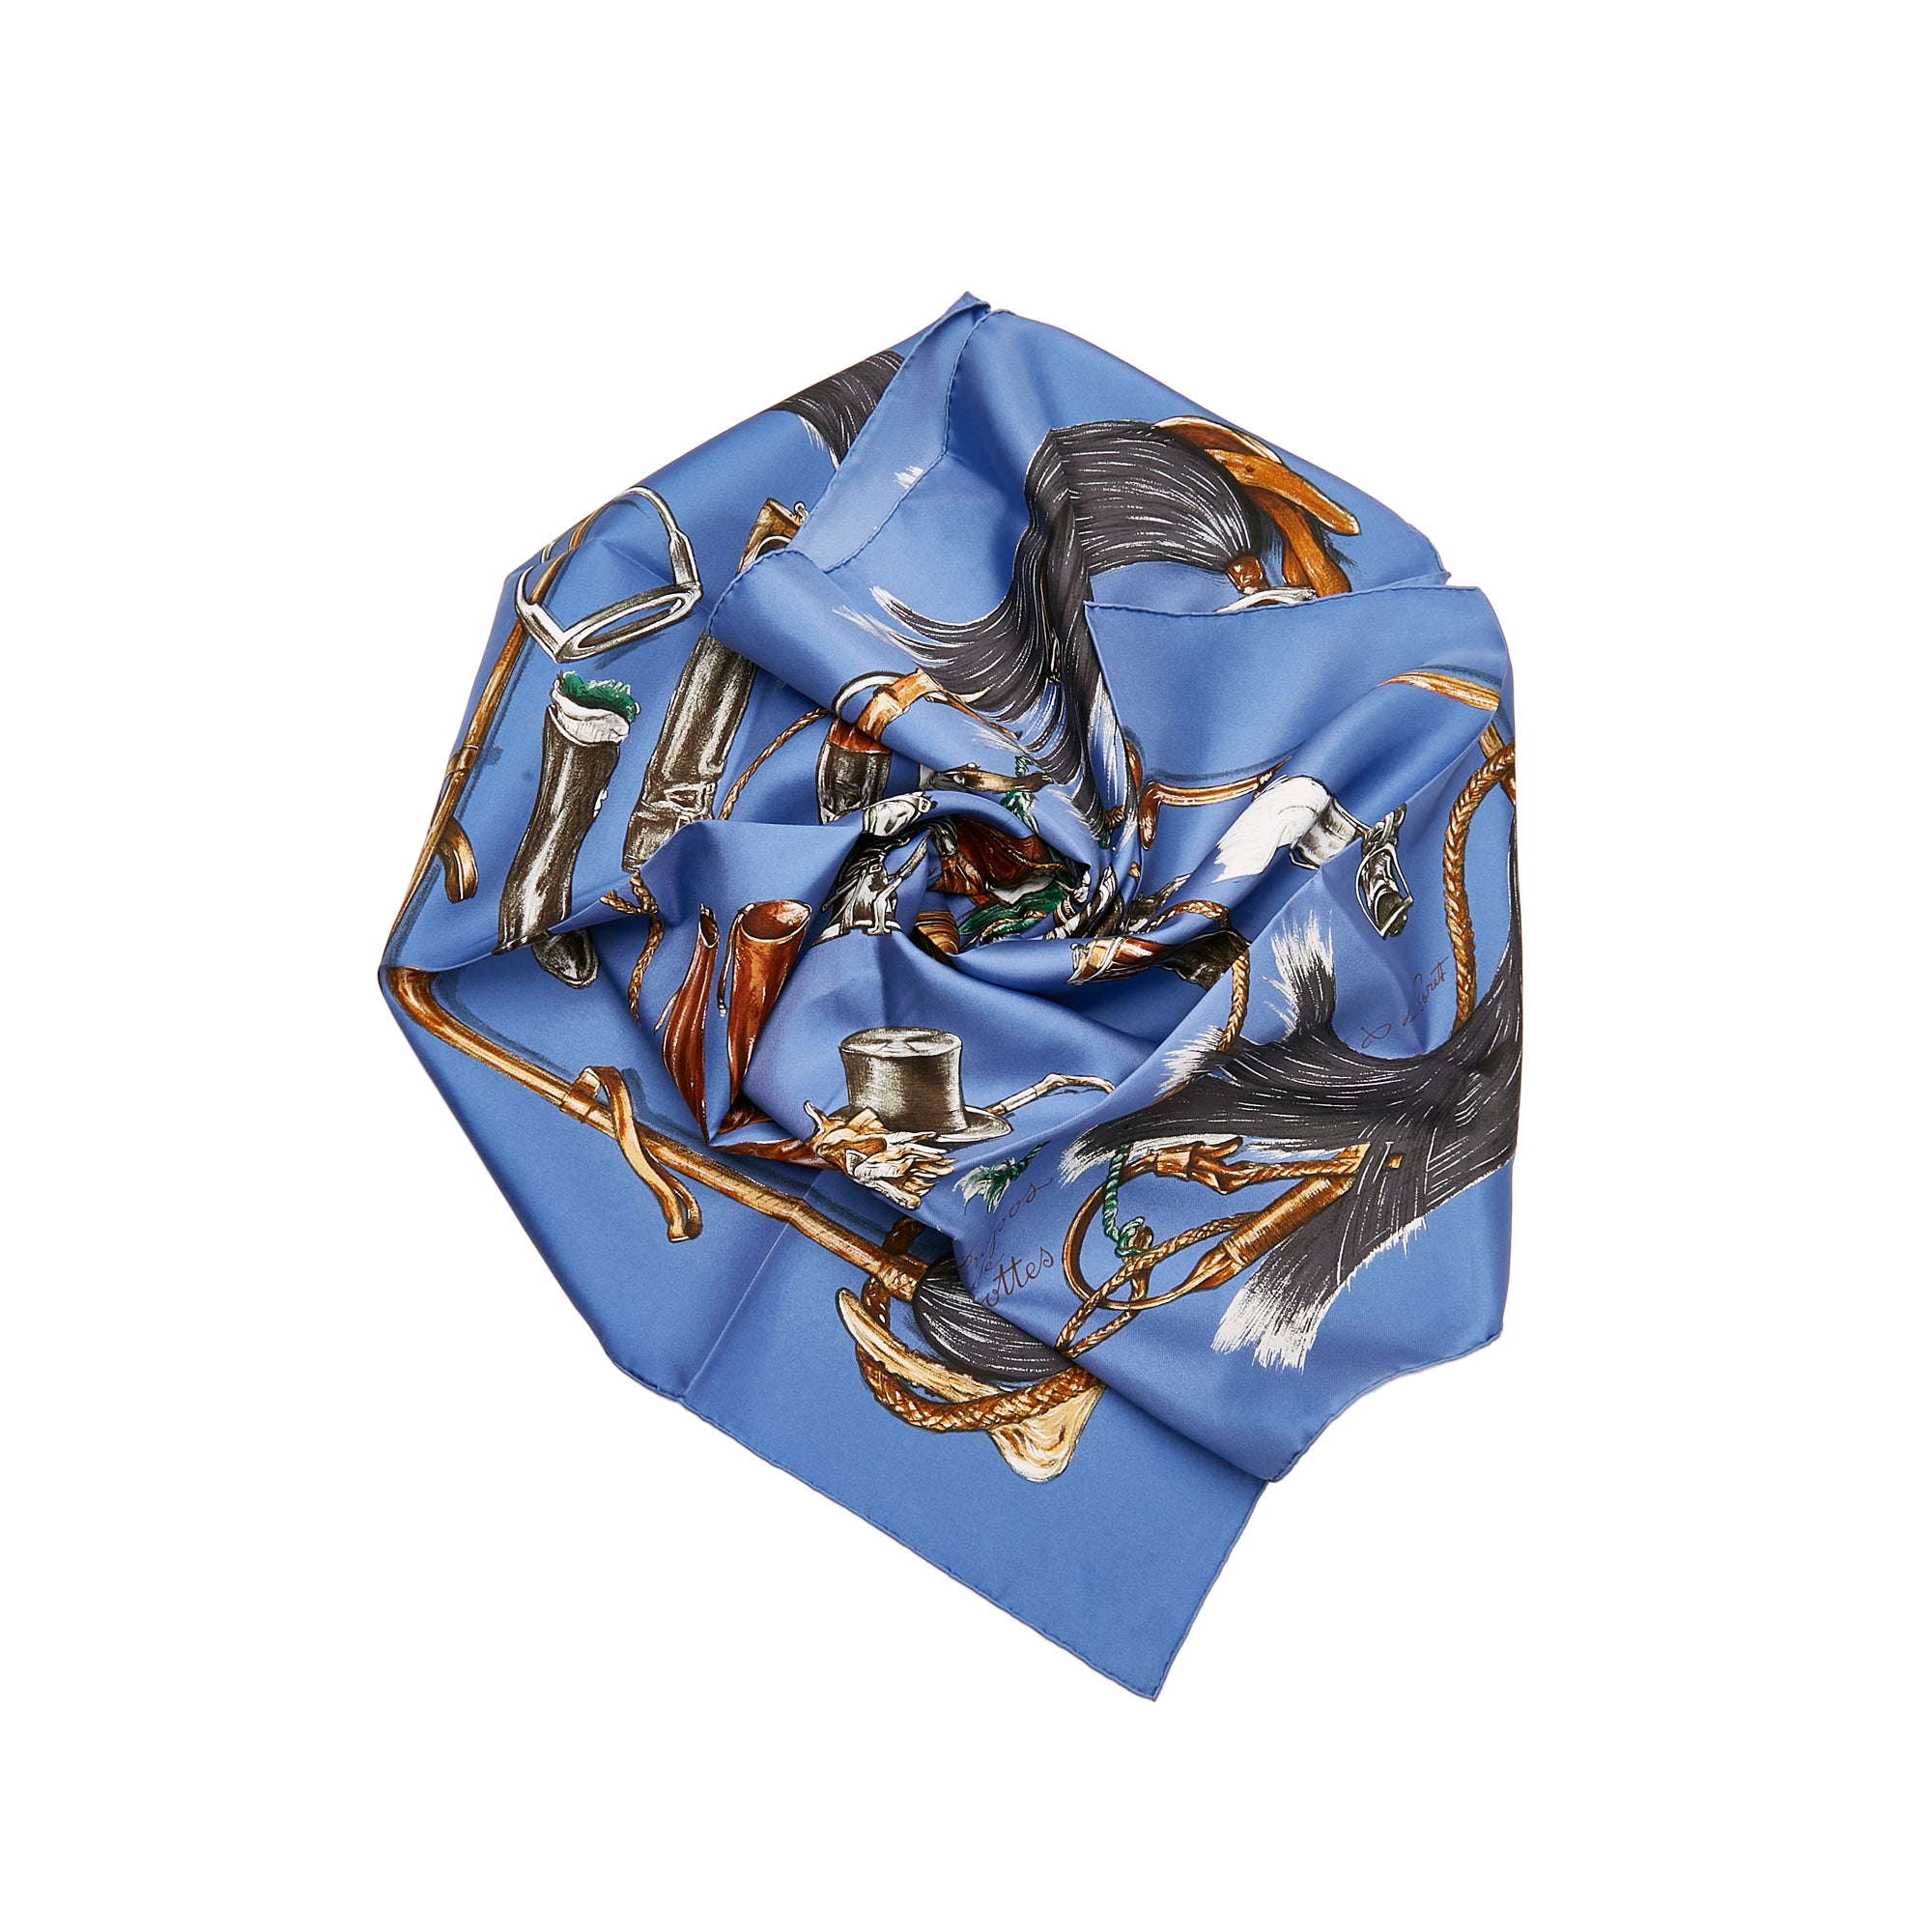 Gucci Silk Scarf Authentication! REAL V FAKE! How to spot a real